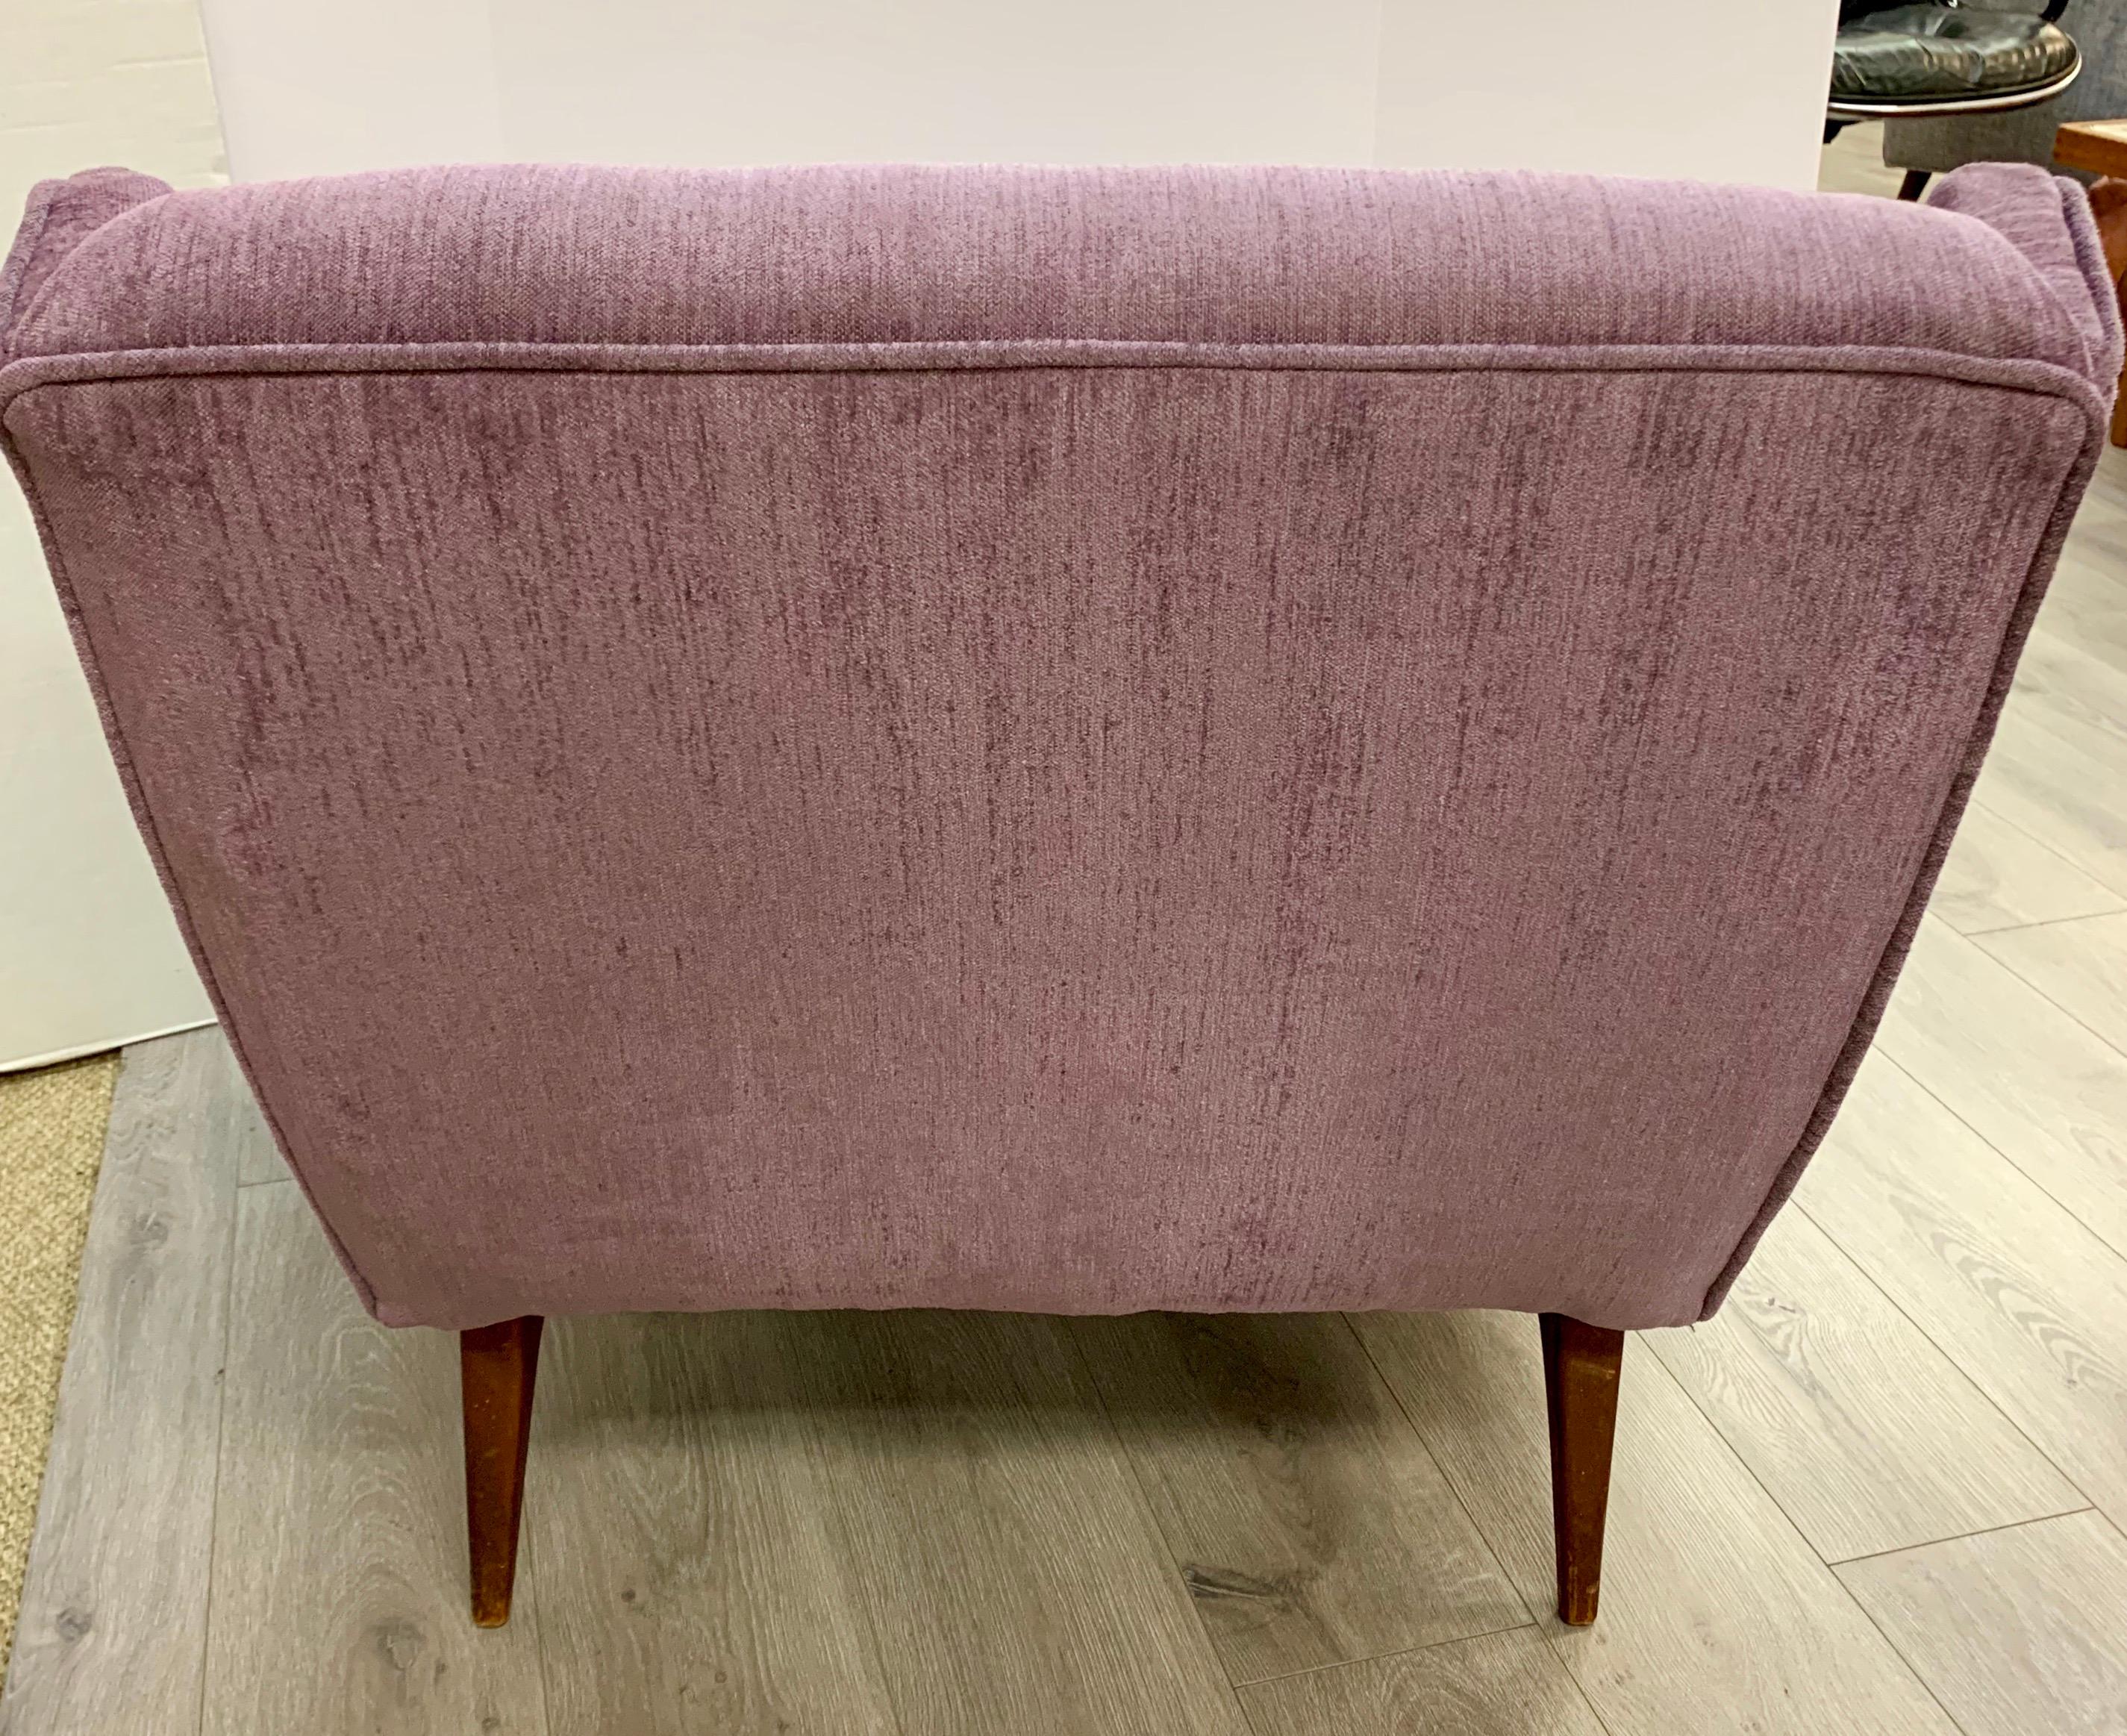 Fabric Mid-Century Modern Tufted Lounge Chair in Lavender Upholstery